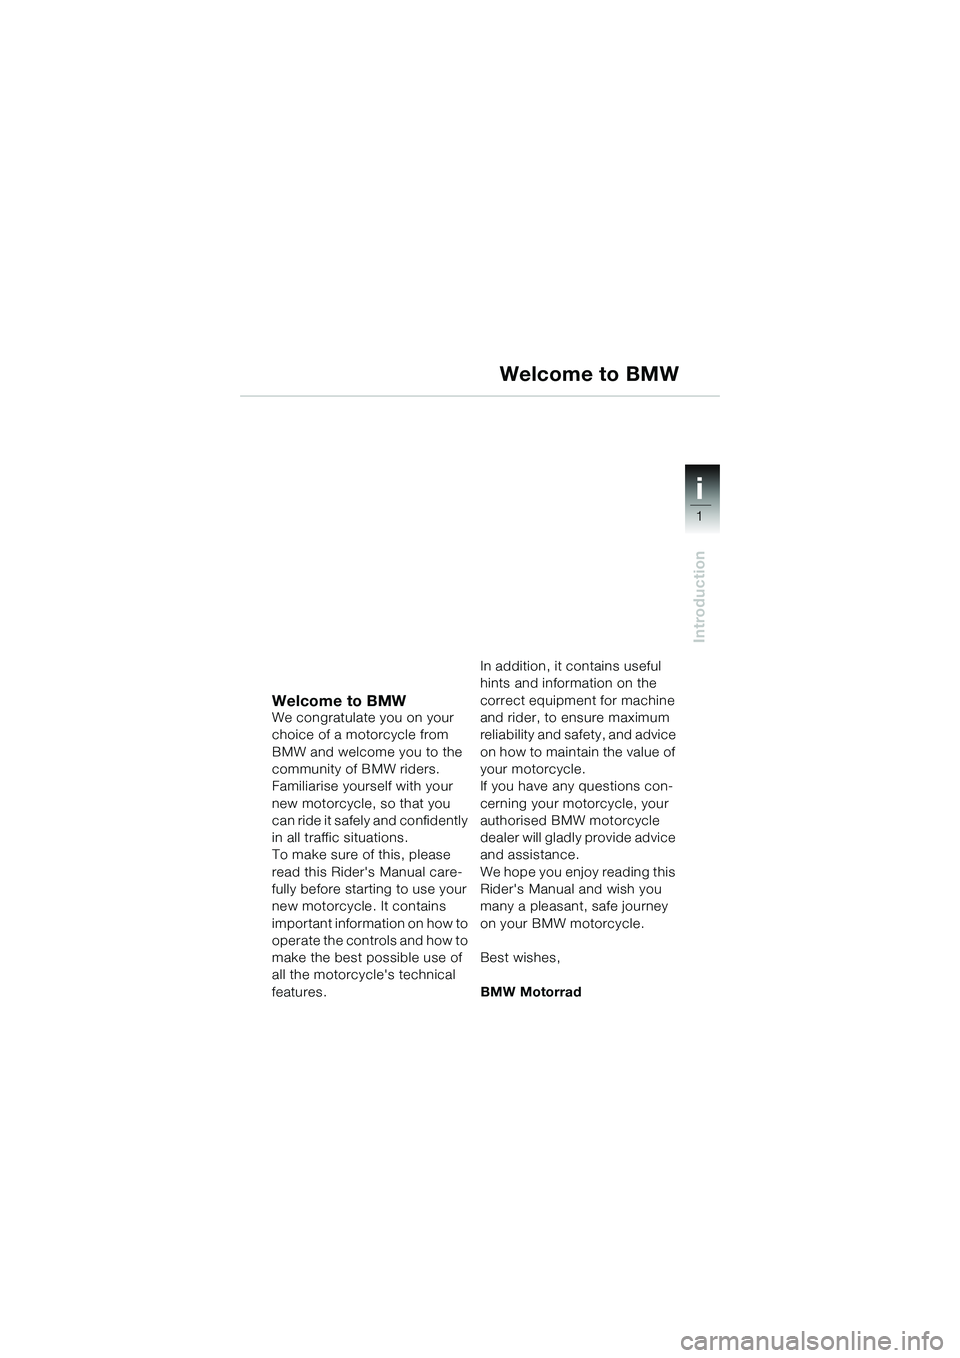 BMW MOTORRAD K 1200 GT 2004  Riders Manual (in English) 1
Introduction
i
Welcome to BMWWe congratulate you on your 
choice of a motorcycle from 
BMW and welcome you to the 
community of BMW riders.
Familiarise yourself with your 
new motorcycle, so that yo